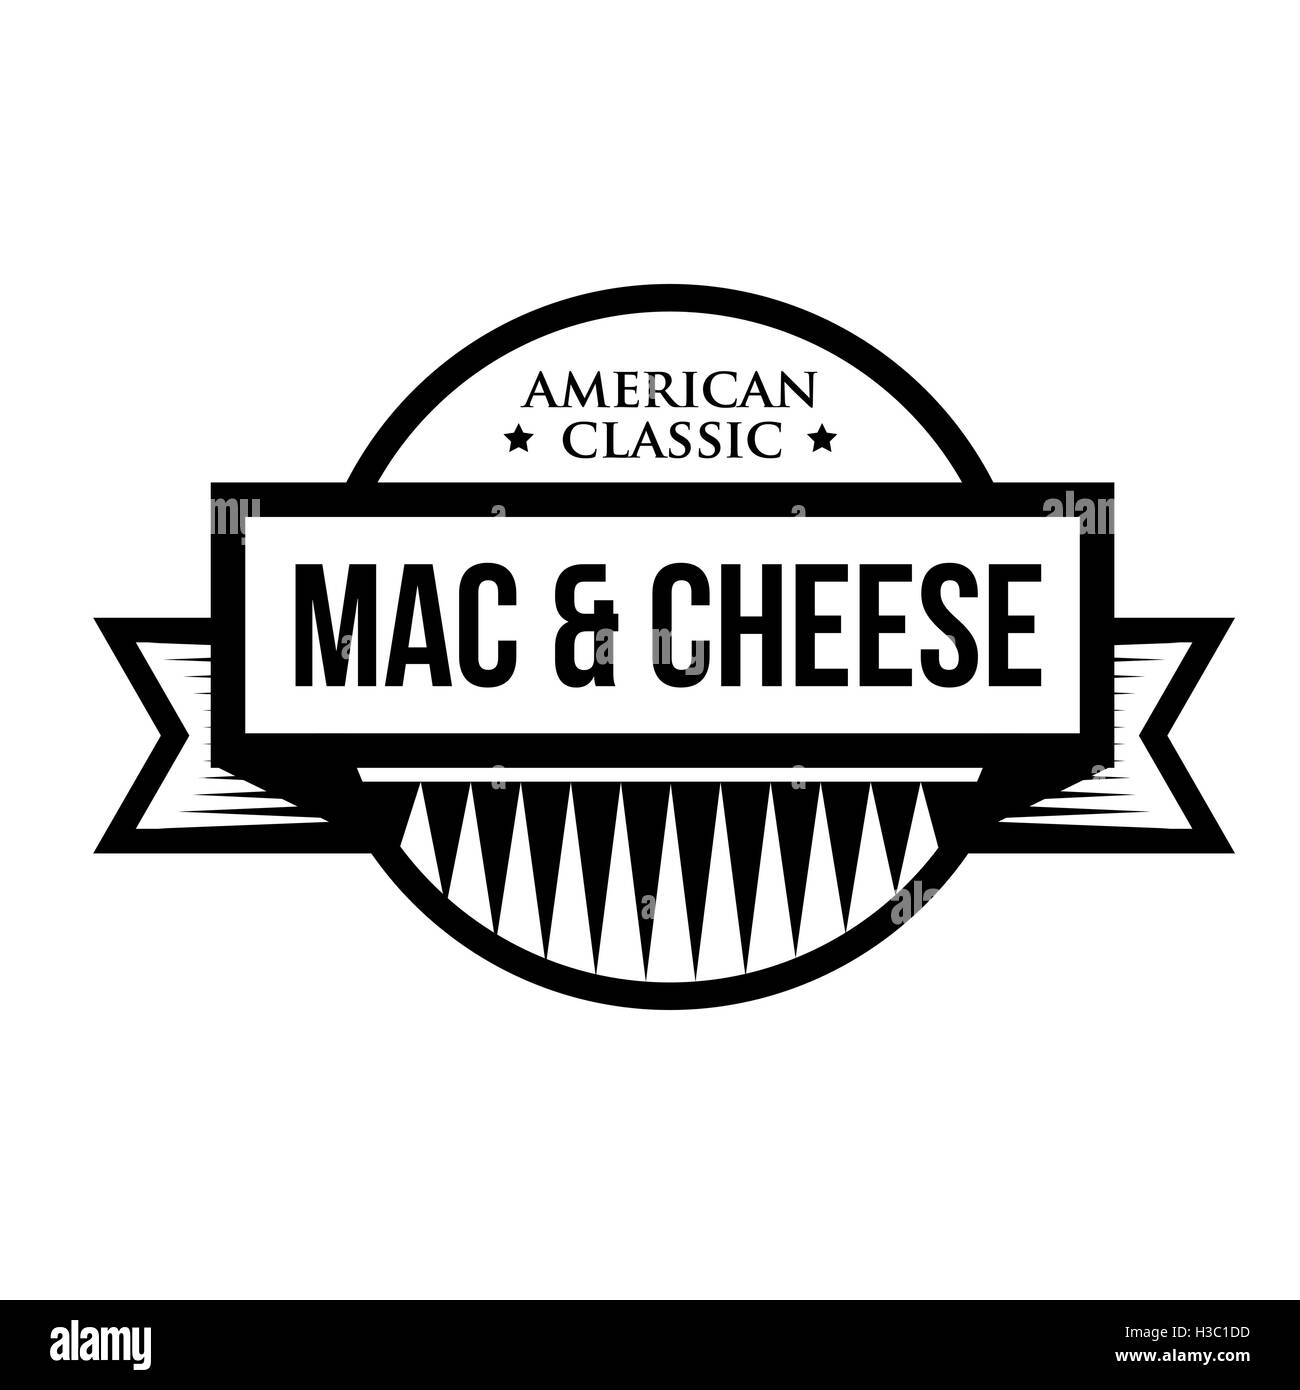 macaroni and cheese clipart black and white